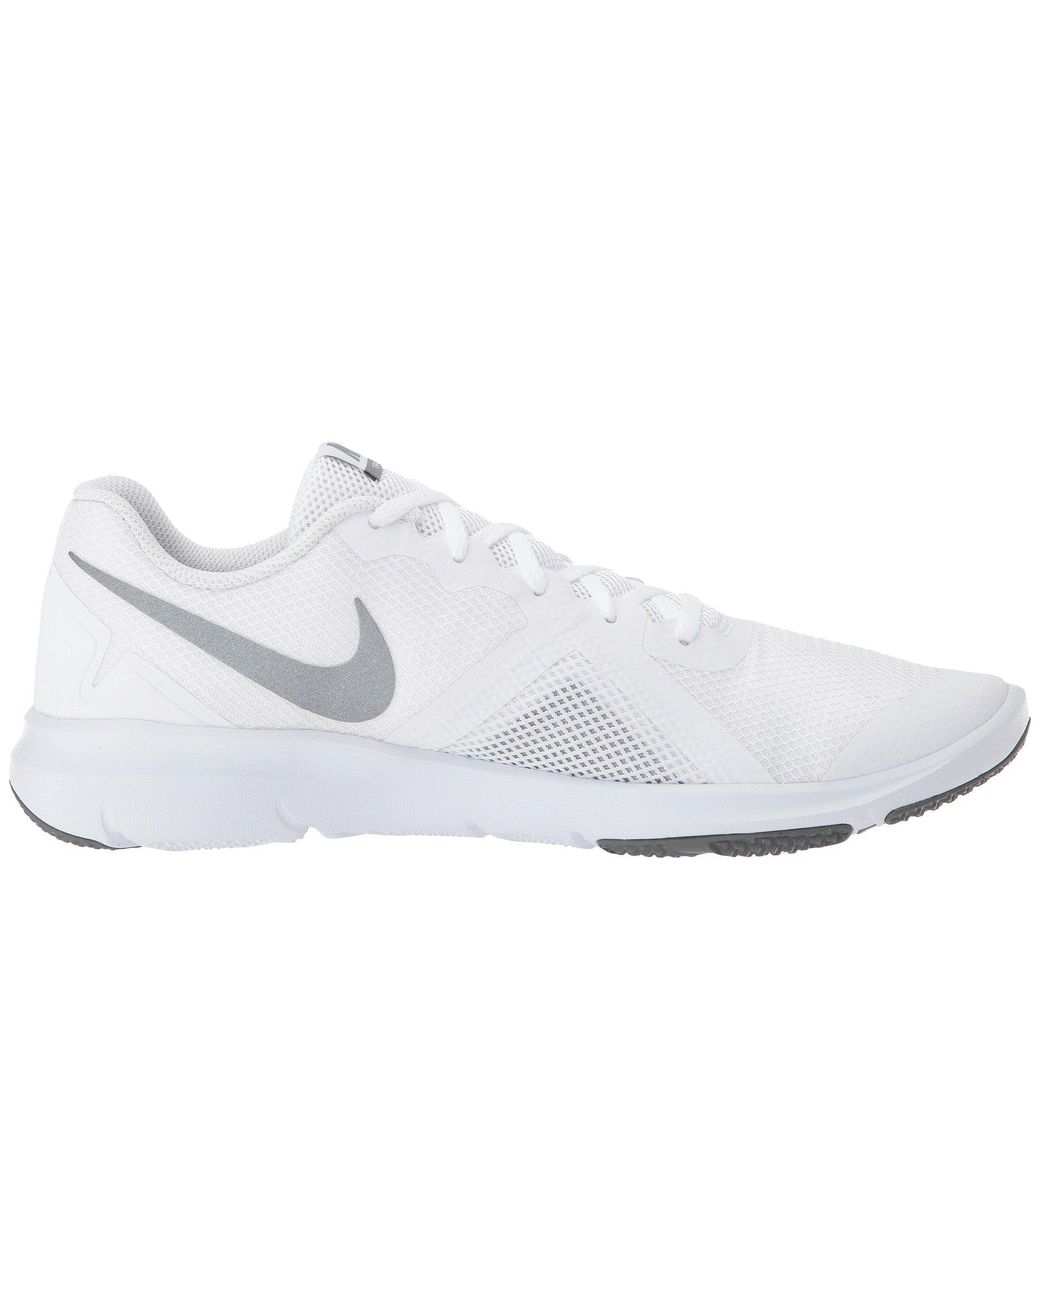 Nike Synthetic Flex Control Ii Training Shoe in White/Metallic Cool  Grey/Cool gr (White) for Men | Lyst